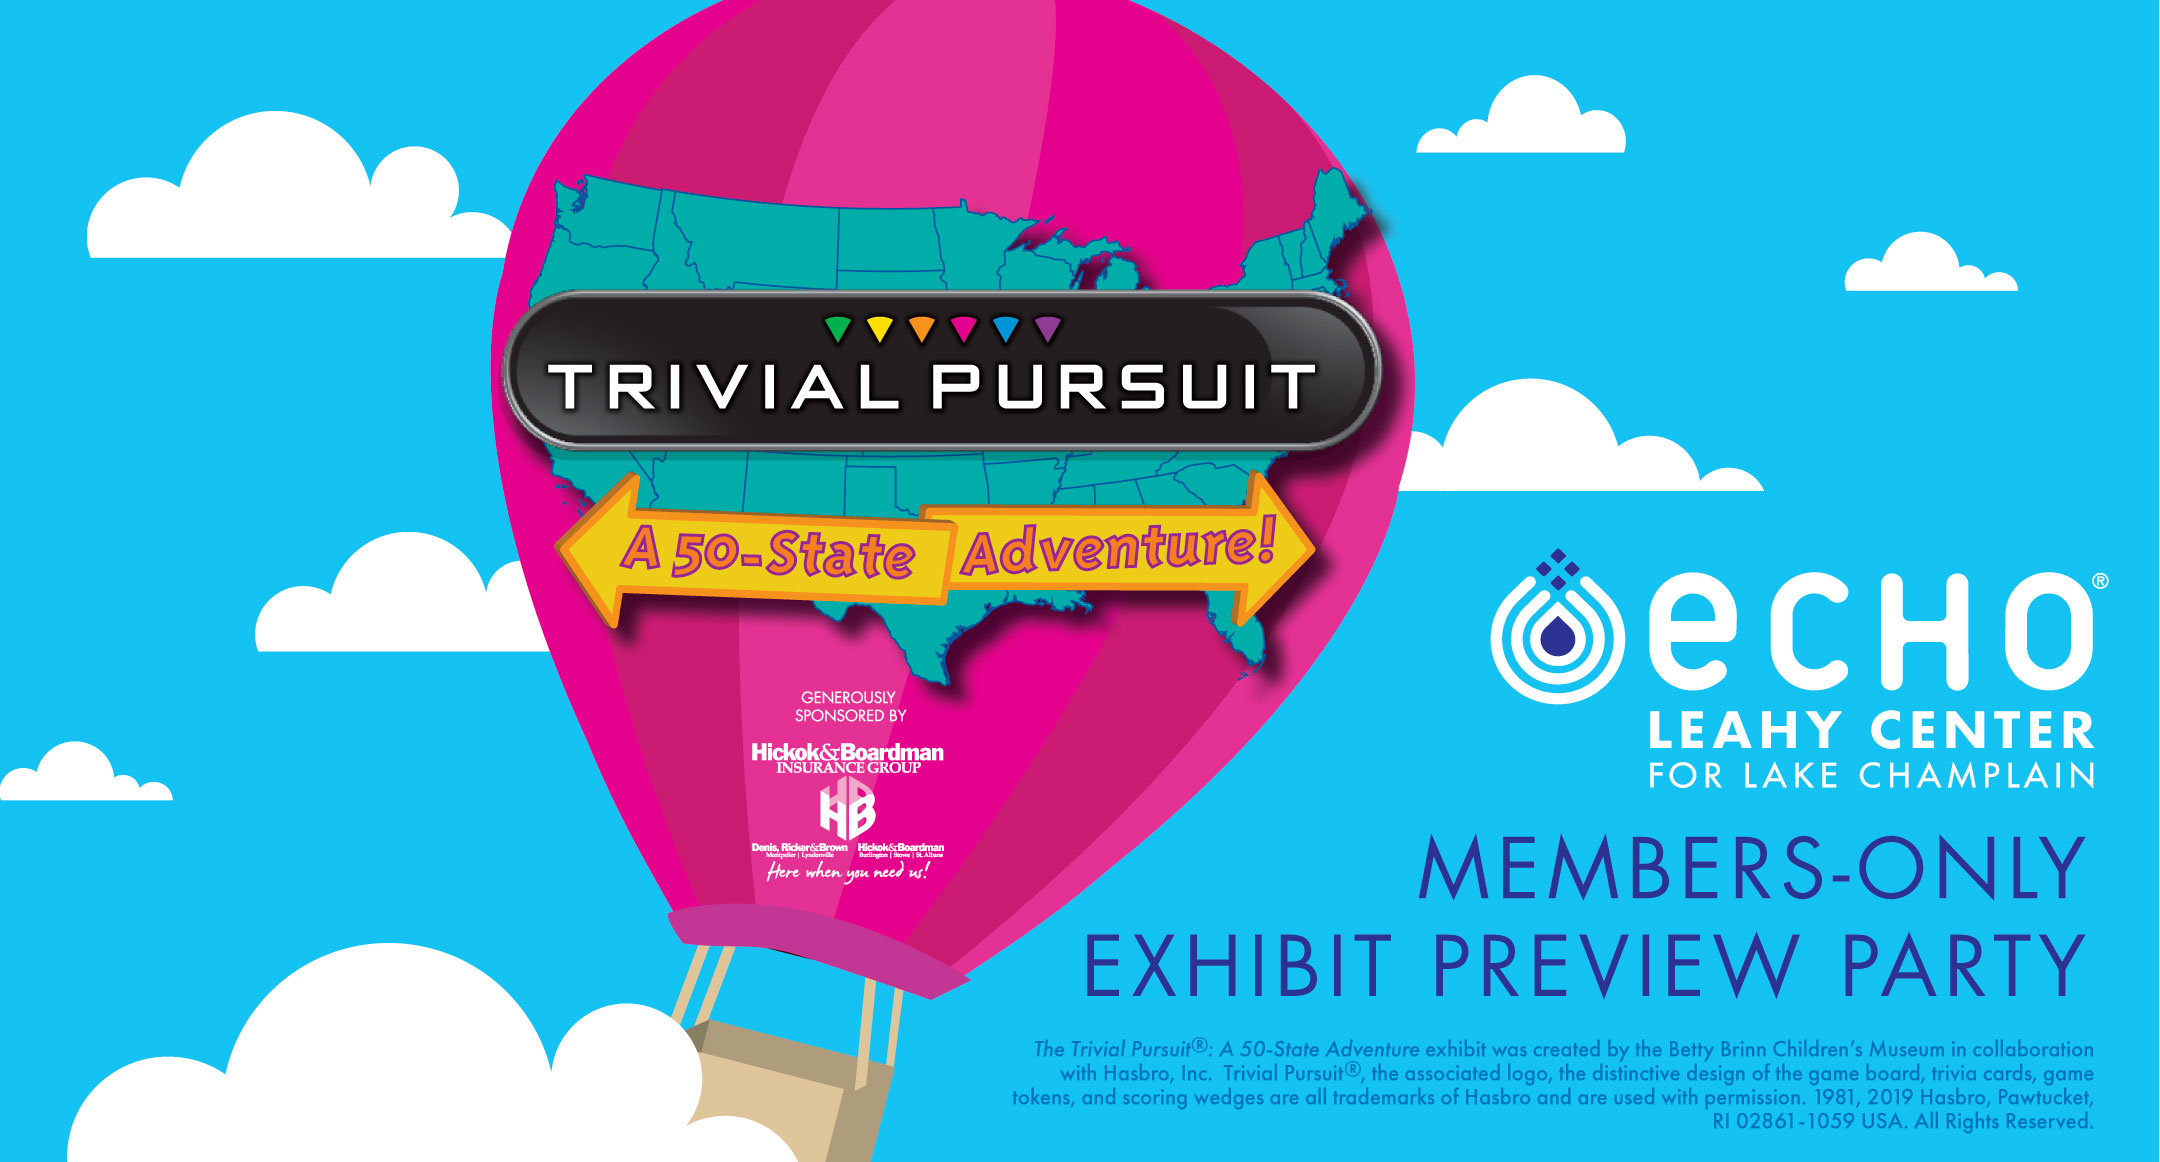 Members-Only Exhibit Preview Party